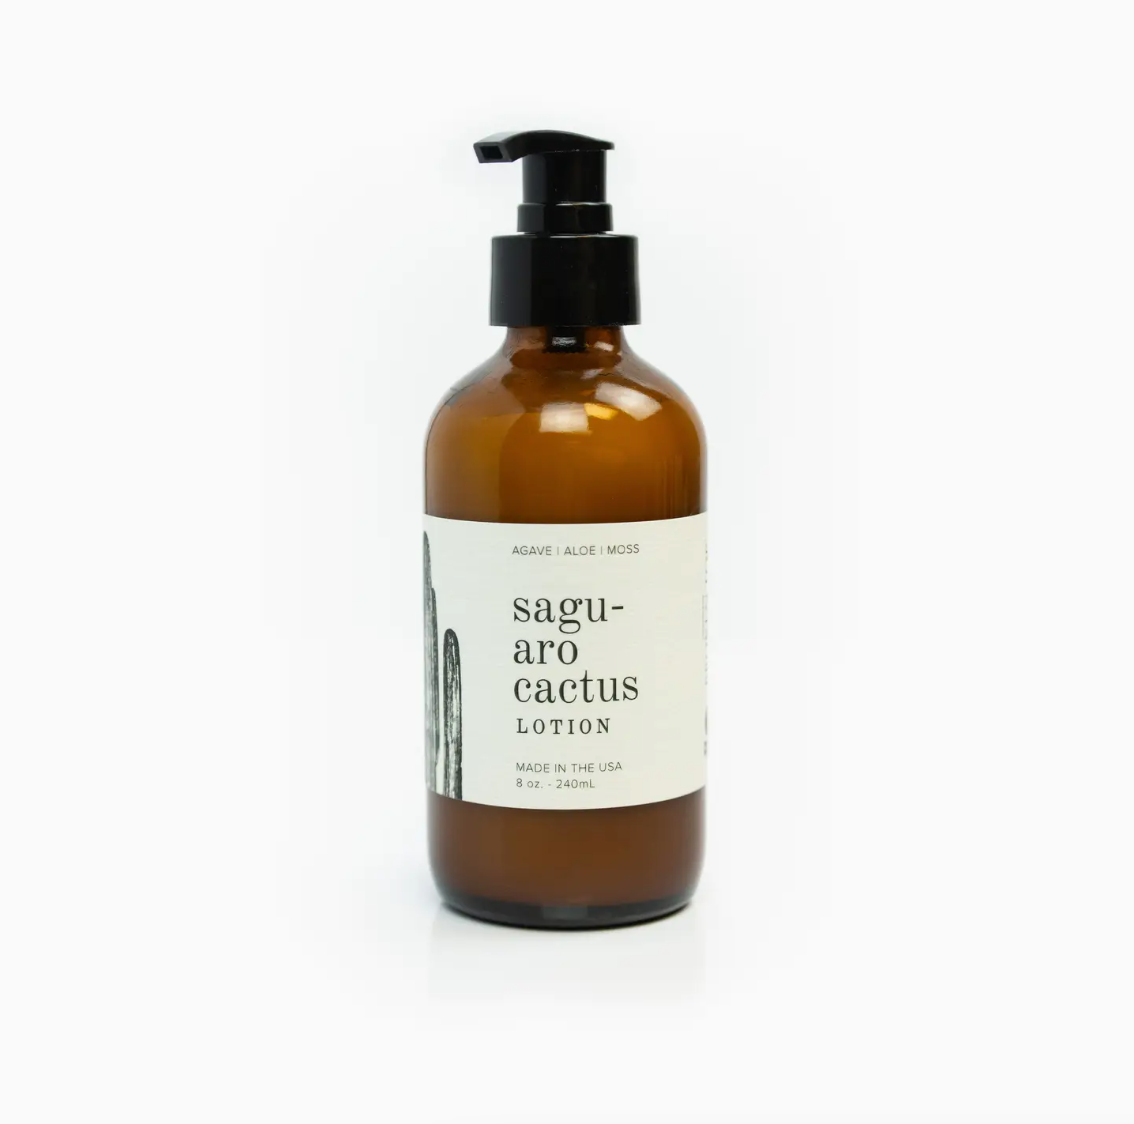 Amber glass bottle with a pump dispenser, labeled "Faire Saguaro Cactus Lotion 8 oz.", isolated on a white background.